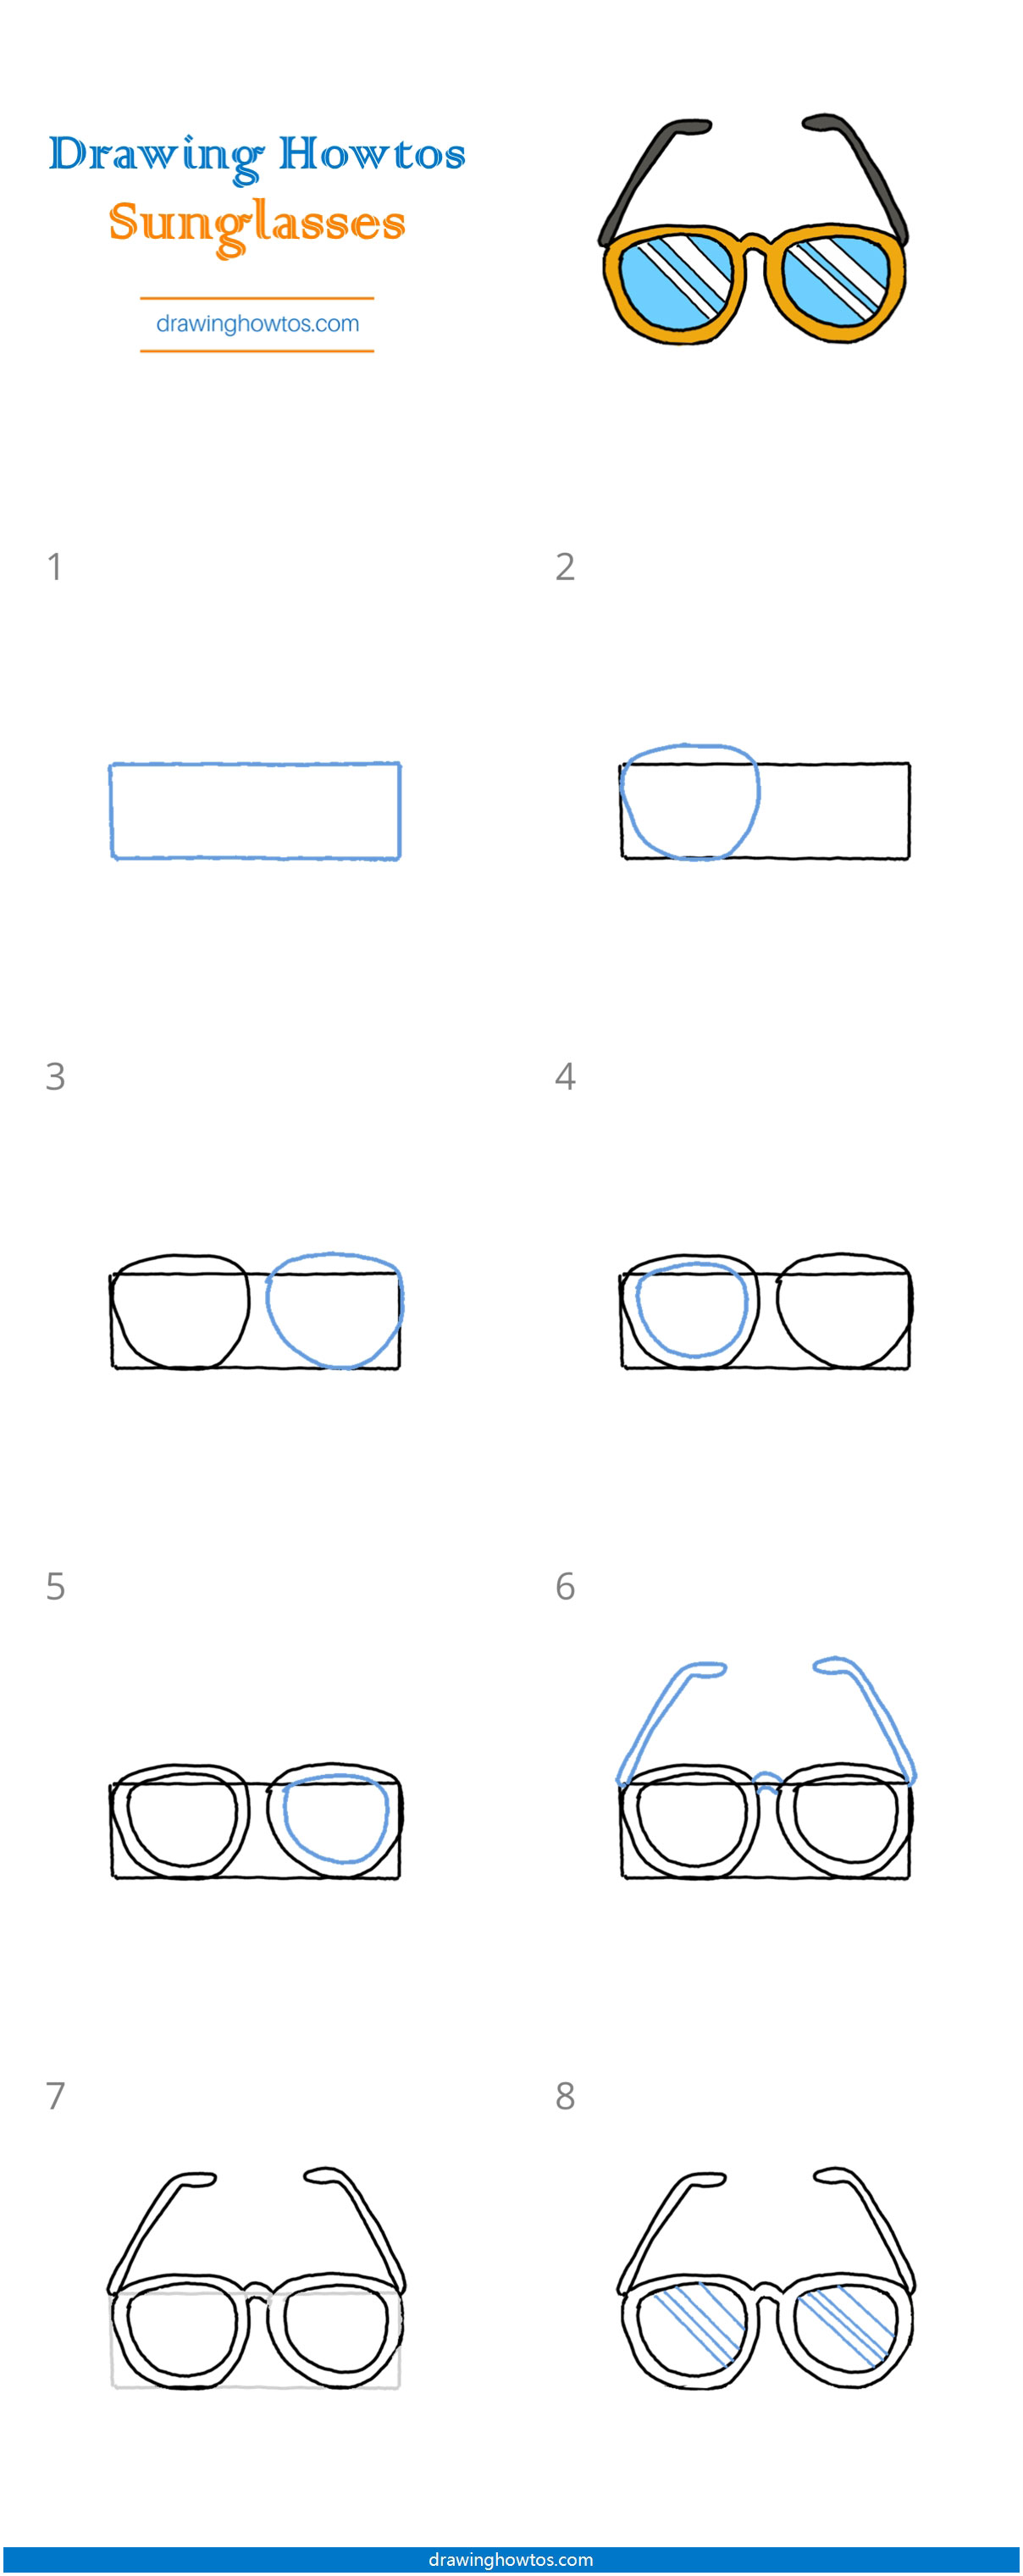 How to Draw Sunglasses Step by Step